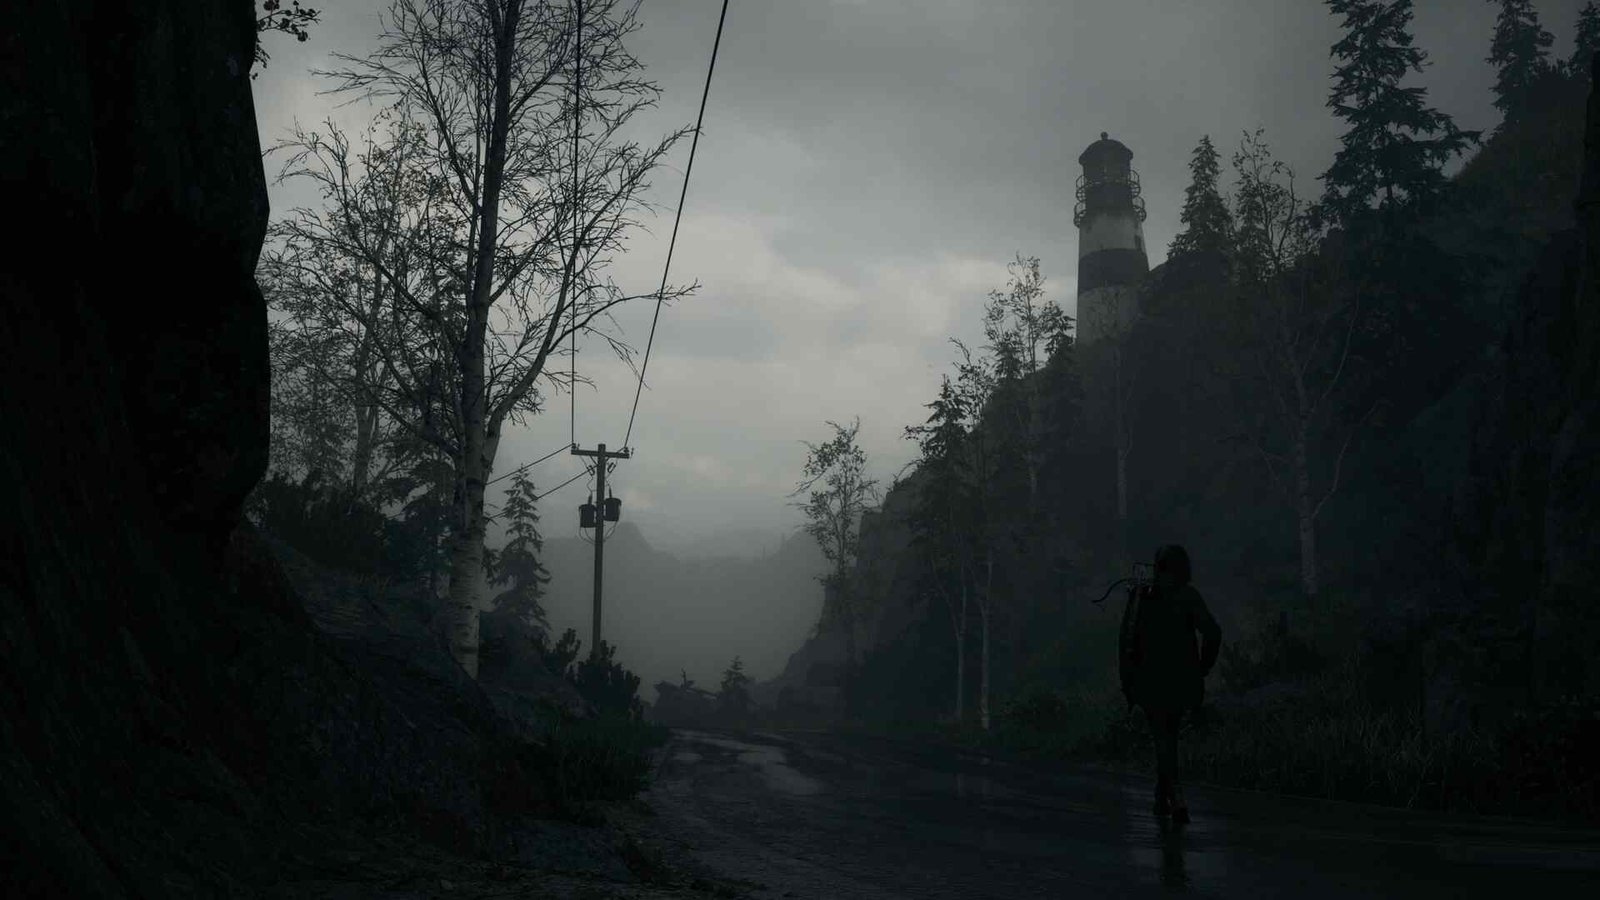 Alan Wake 2 Steam Deck black screen issue: Is there any fix yet